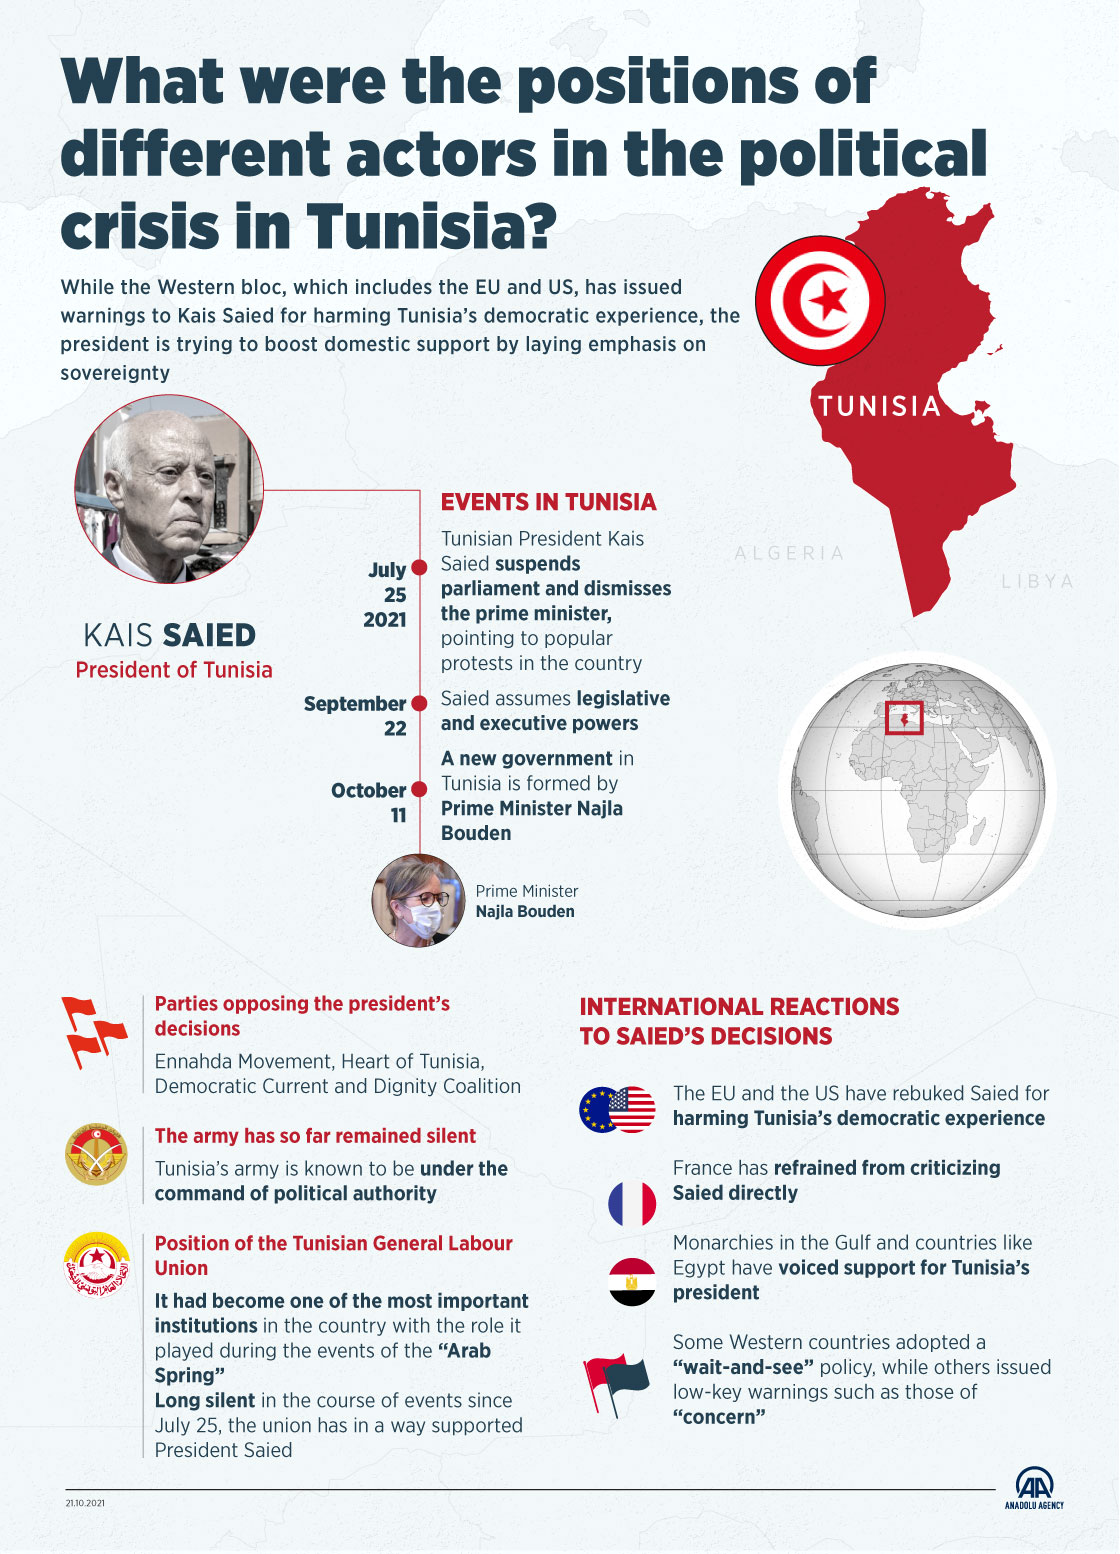 What were the positions of different actors in the political crisis in Tunisia?